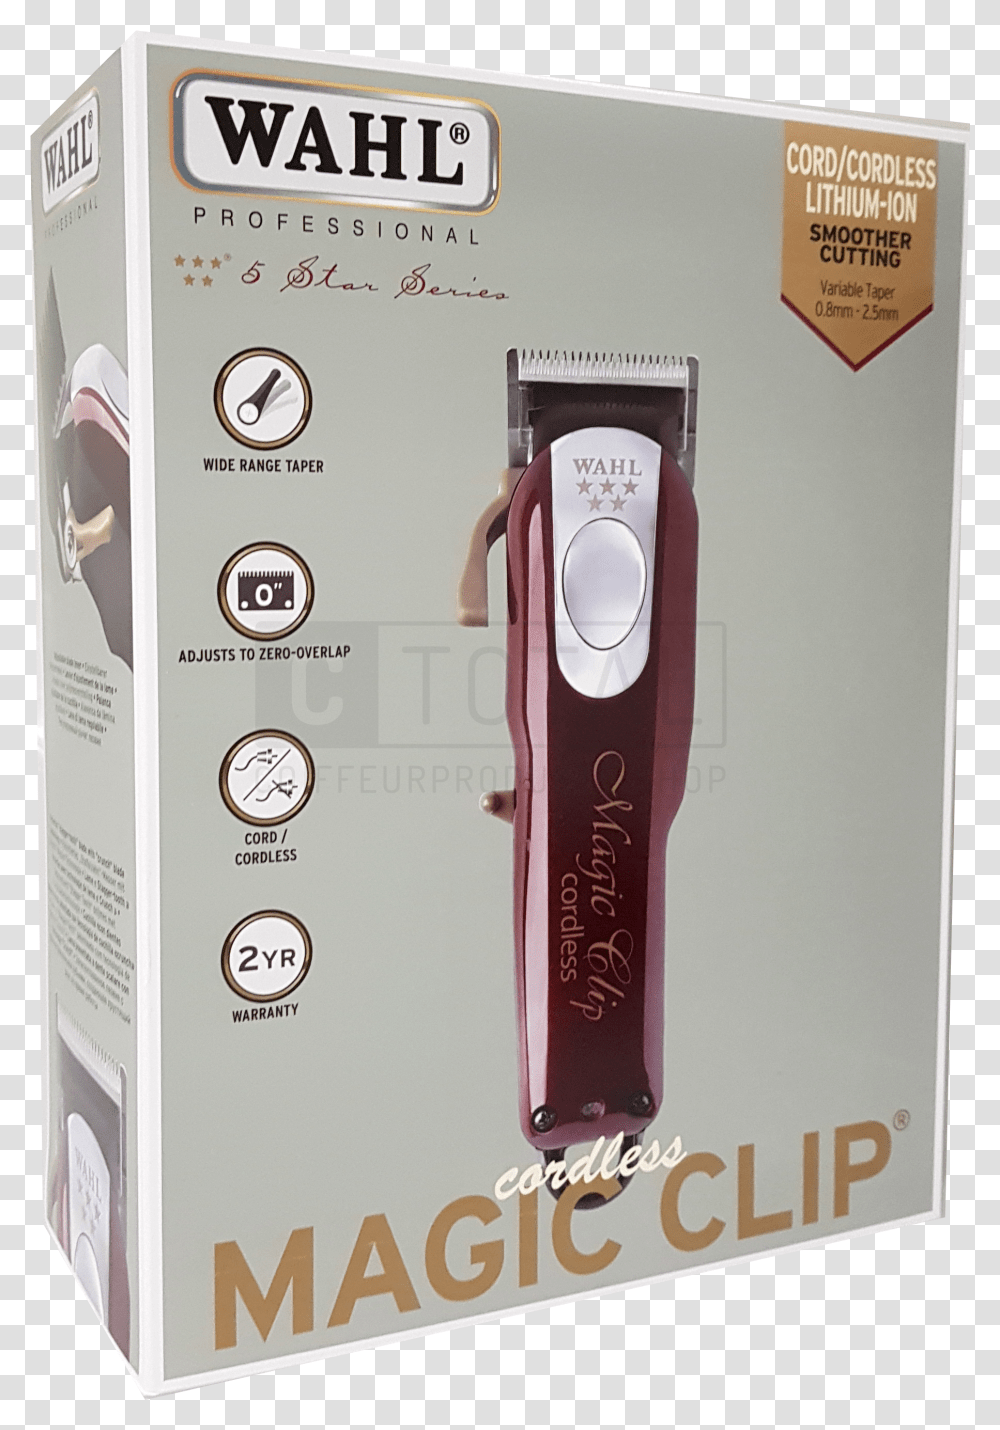 Wahl 5 Star Cordless Magic Clip Hair Clipper Grooming Trimmer Transparent Png